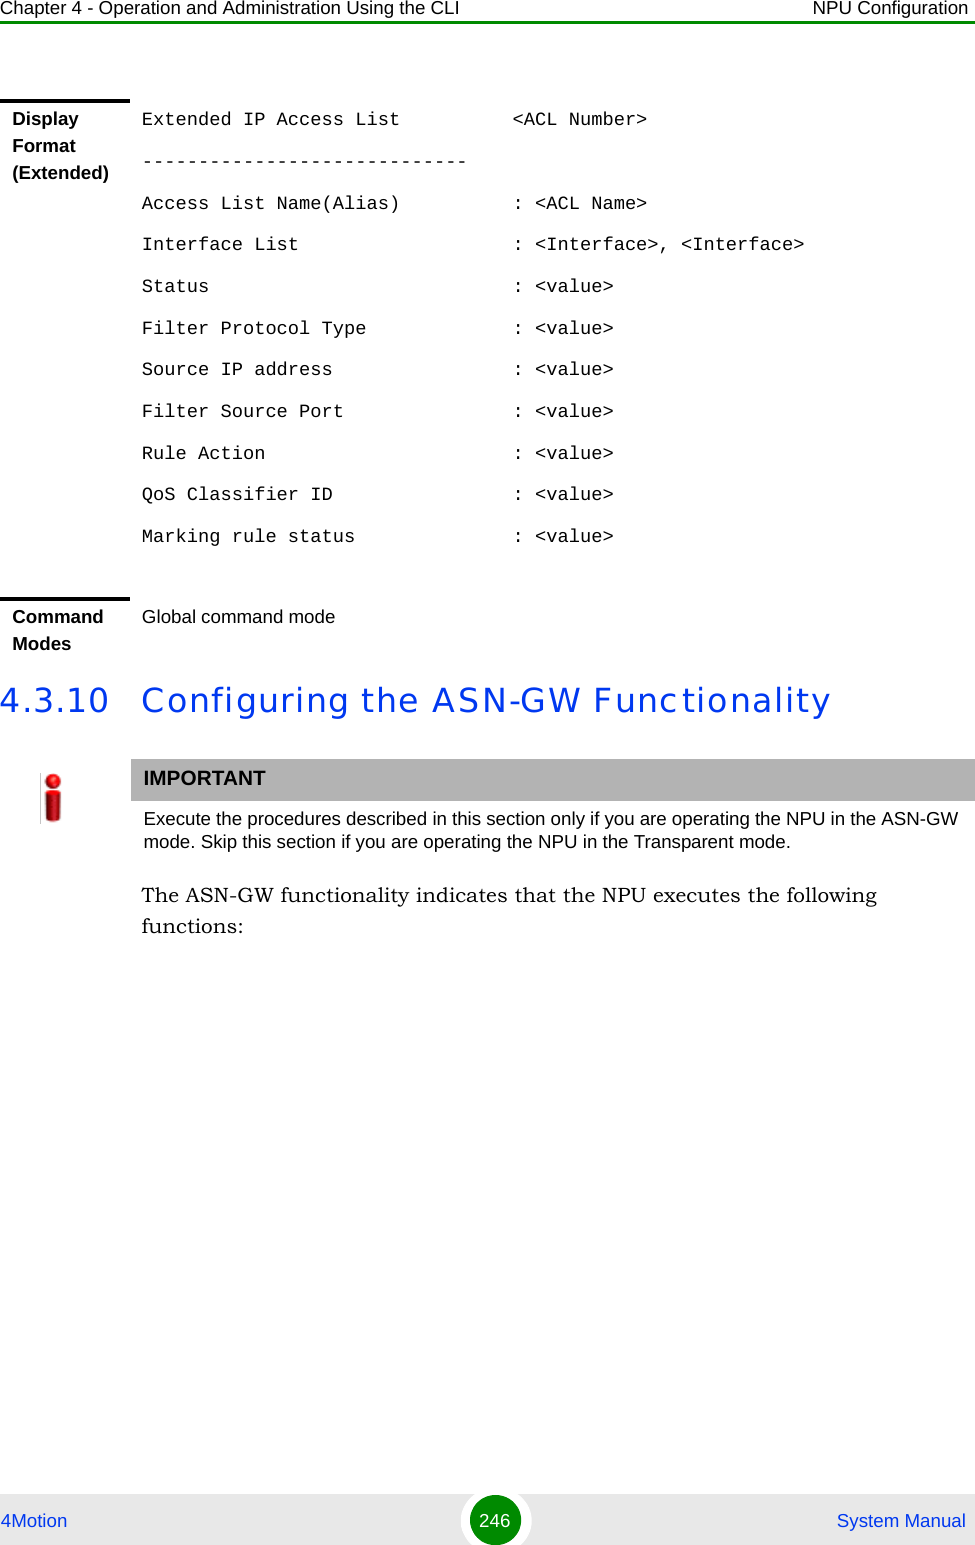 Chapter 4 - Operation and Administration Using the CLI NPU Configuration4Motion 246  System Manual4.3.10 Configuring the ASN-GW FunctionalityThe ASN-GW functionality indicates that the NPU executes the following functions:Display Format (Extended)Extended IP Access List          &lt;ACL Number&gt;-----------------------------Access List Name(Alias)          : &lt;ACL Name&gt;Interface List                   : &lt;Interface&gt;, &lt;Interface&gt;Status                           : &lt;value&gt;Filter Protocol Type             : &lt;value&gt;Source IP address                : &lt;value&gt;Filter Source Port               : &lt;value&gt;Rule Action                      : &lt;value&gt;QoS Classifier ID                : &lt;value&gt;Marking rule status              : &lt;value&gt;Command ModesGlobal command modeIMPORTANTExecute the procedures described in this section only if you are operating the NPU in the ASN-GW mode. Skip this section if you are operating the NPU in the Transparent mode.